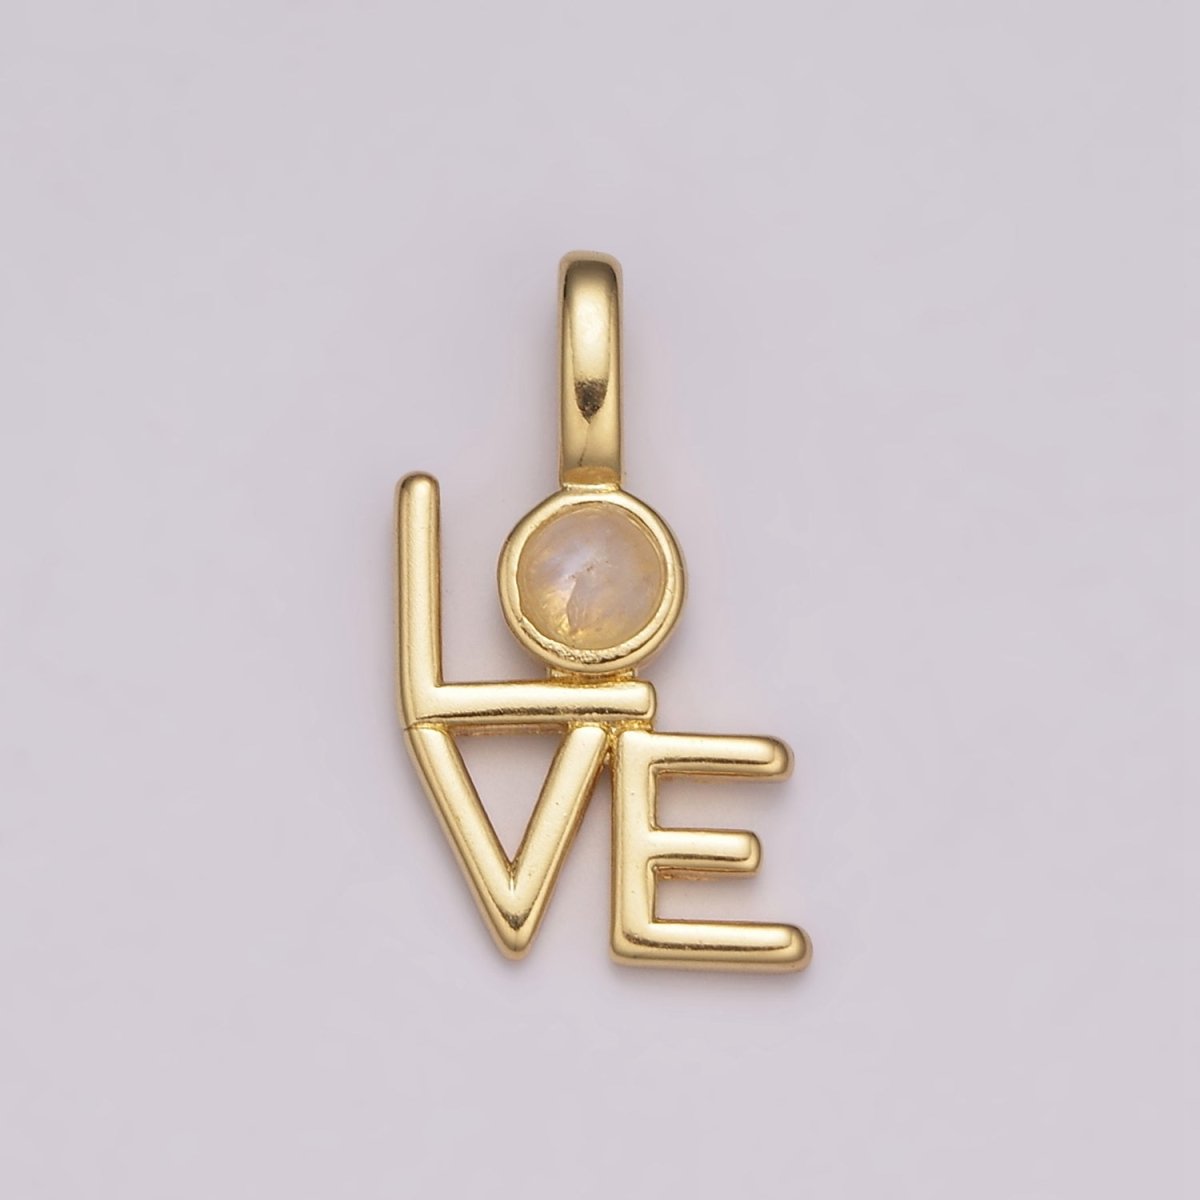 Gold LOVE Charms 21x11mm, Word Love Pendant MoonStone Jewelry Making Supplies Hollow Love Findings N-1485 - DLUXCA